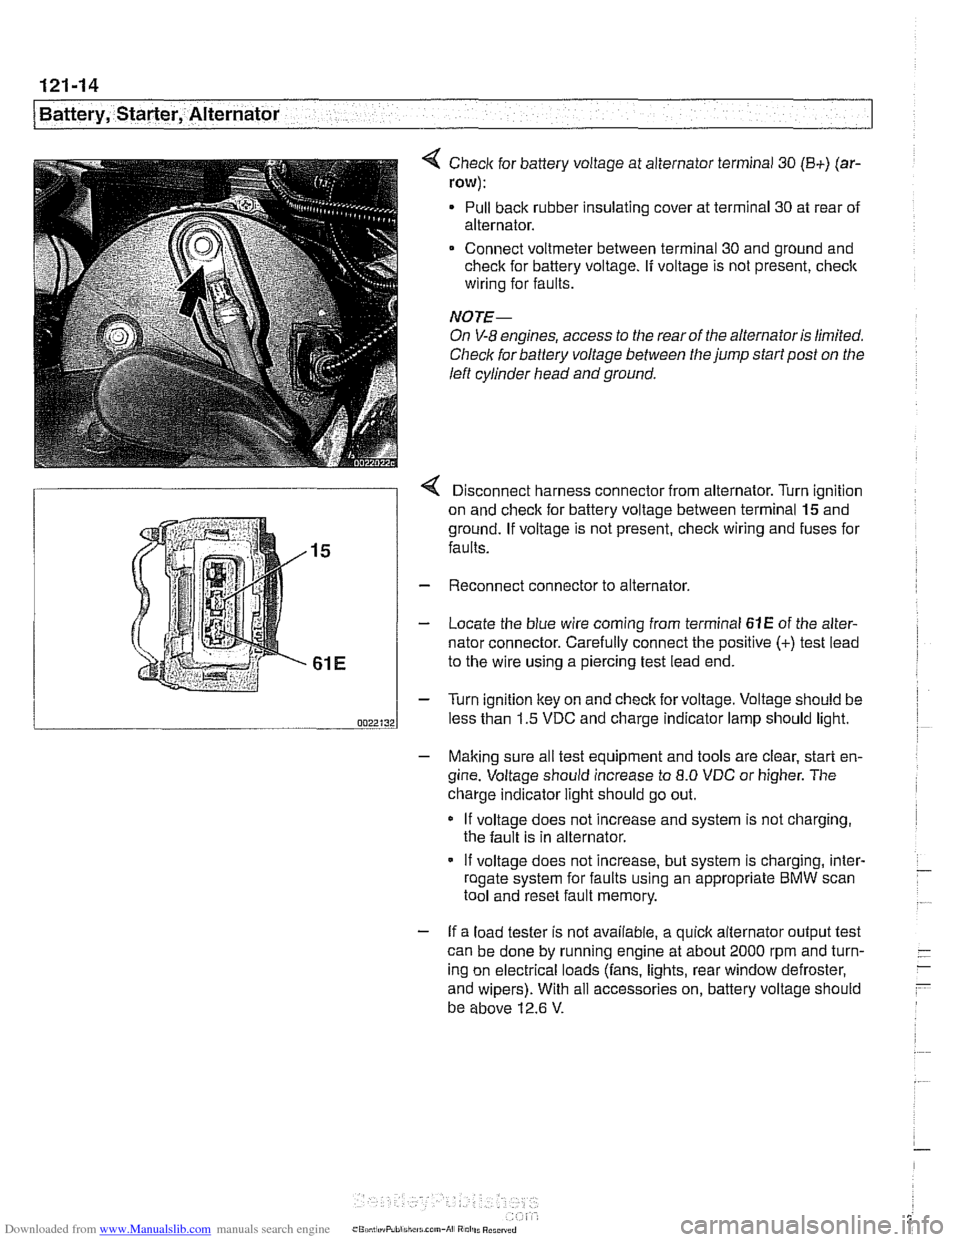 BMW 525i 2001 E39 Workshop Manual Downloaded from www.Manualslib.com manuals search engine 
- - 
/Battery, Starter,  Alternator -- - -. - --I 
< Check for battery  voltage  at alternator  terminal 30 (B+) (ar- 
row): 
Pull back rubber